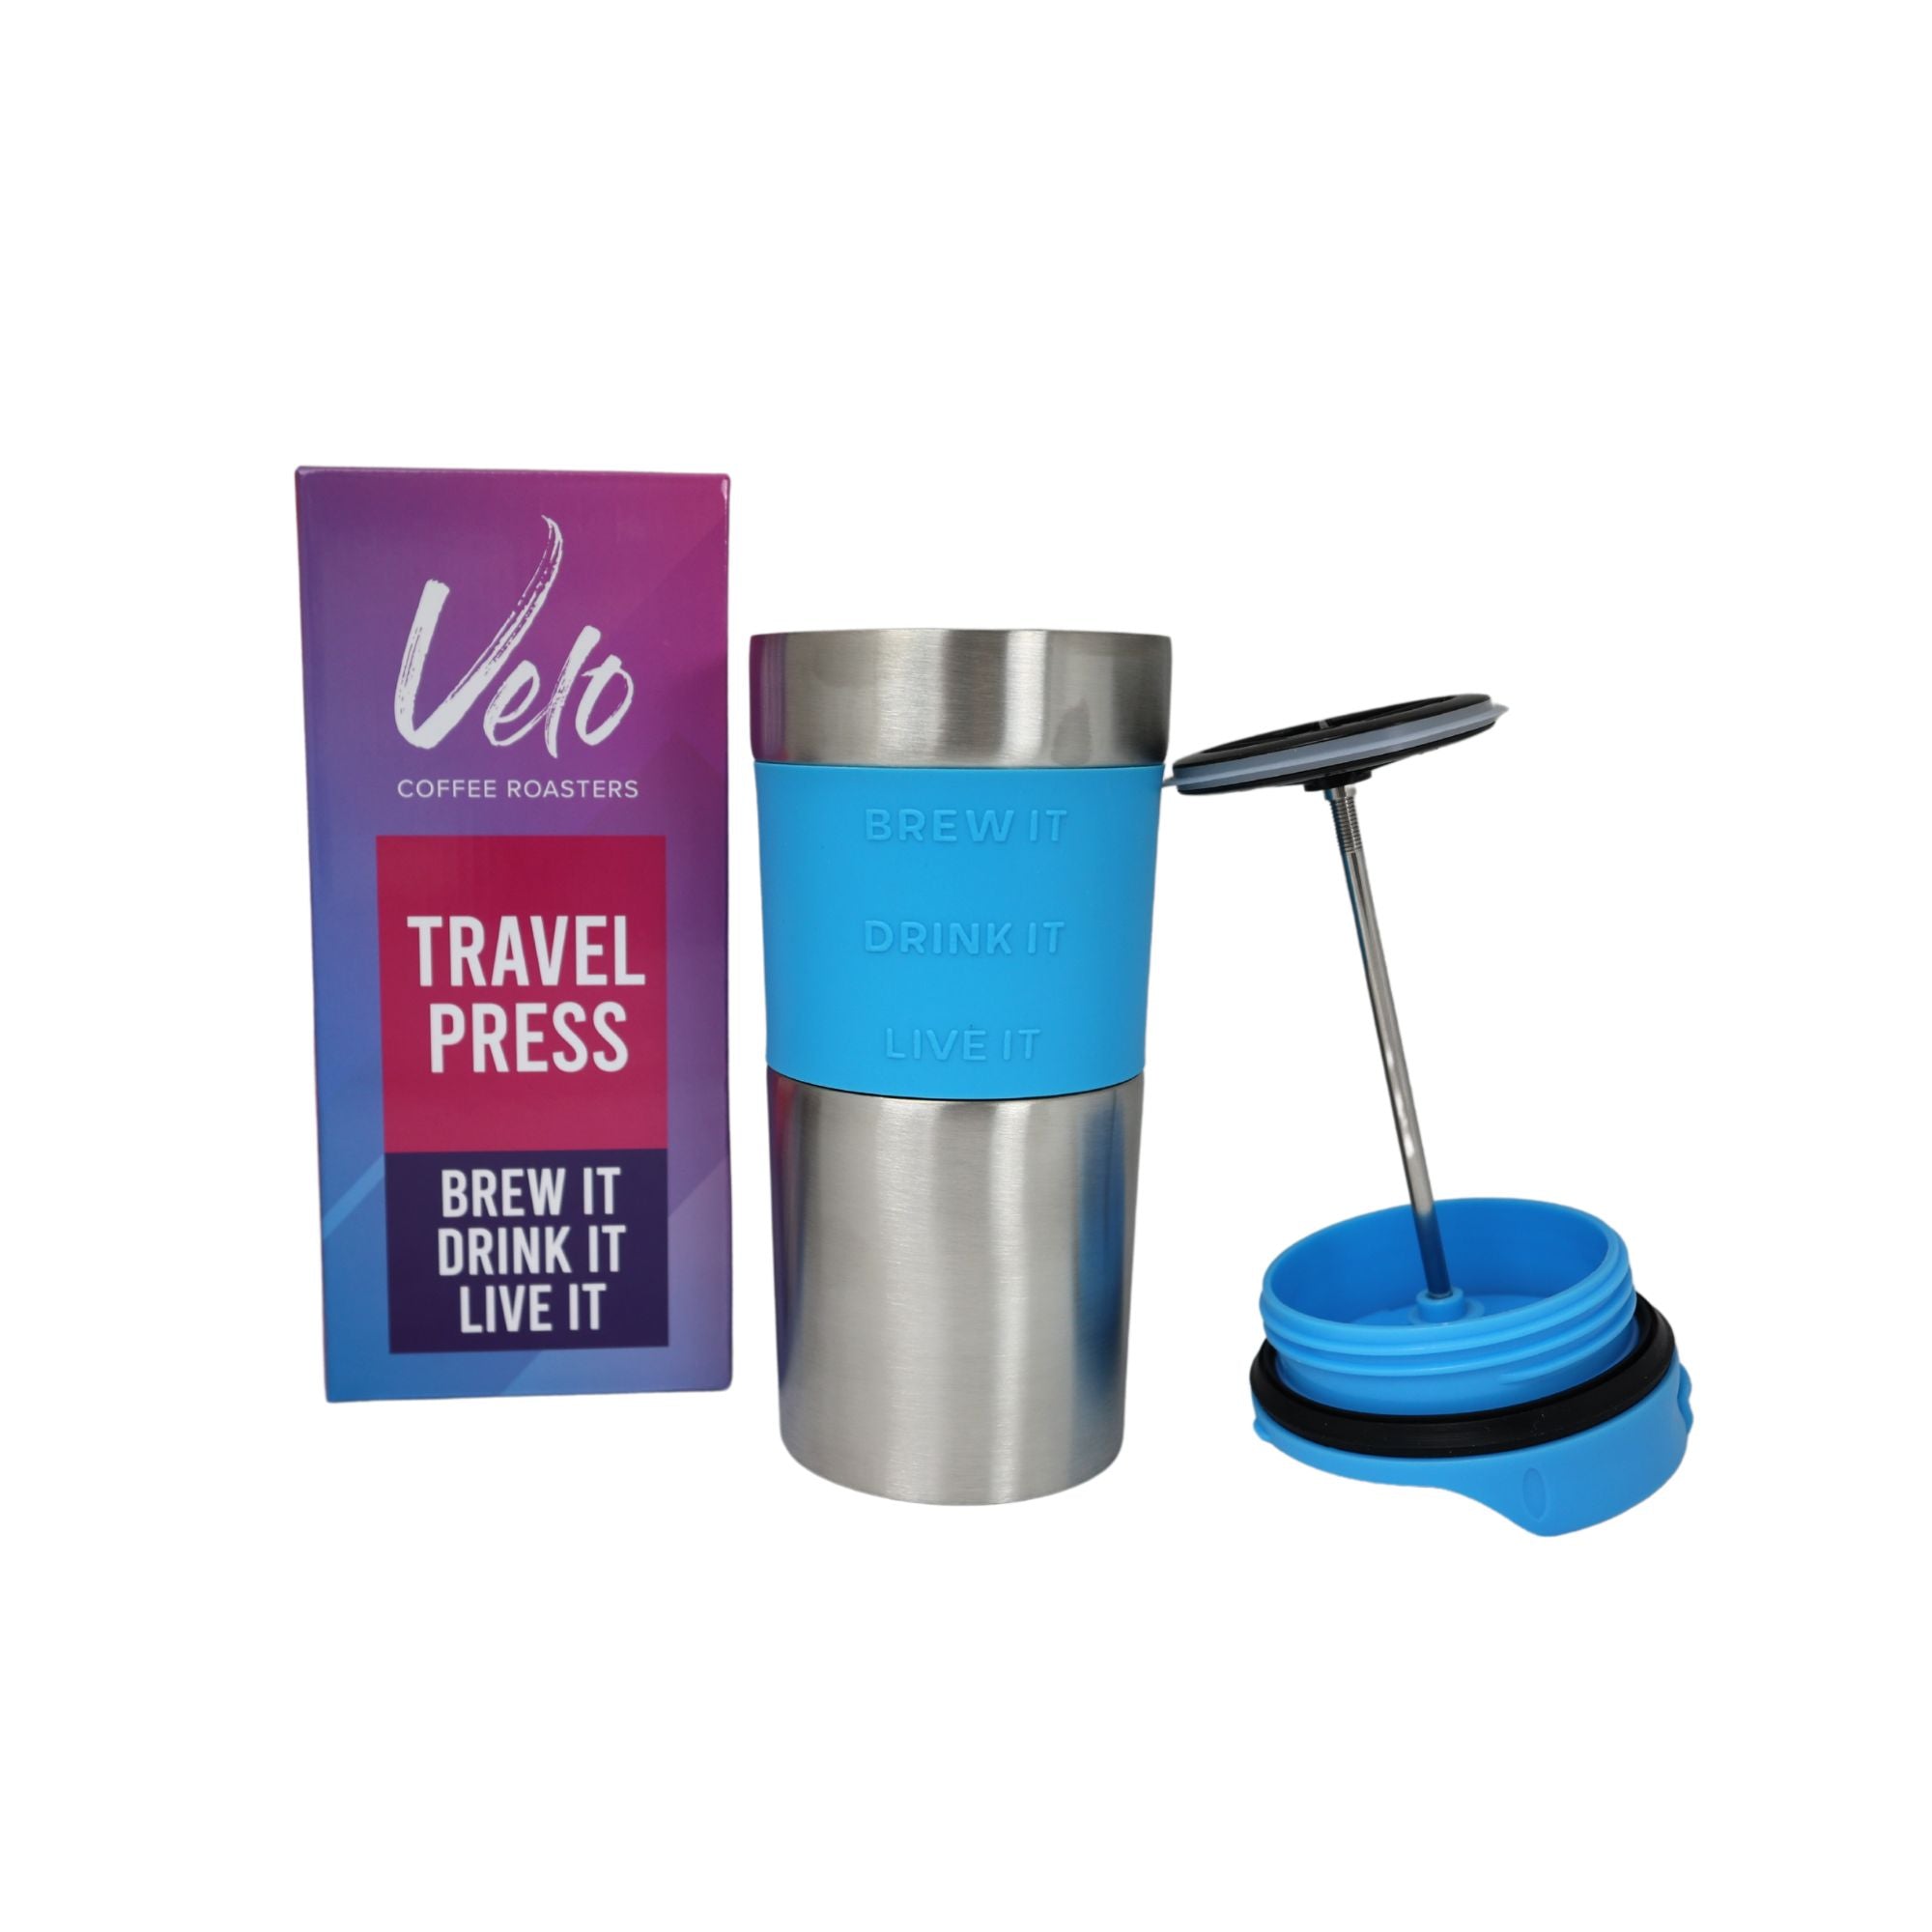 Velo Coffee + Protein and Travel Press Gift Set - Velo Coffee Roasters